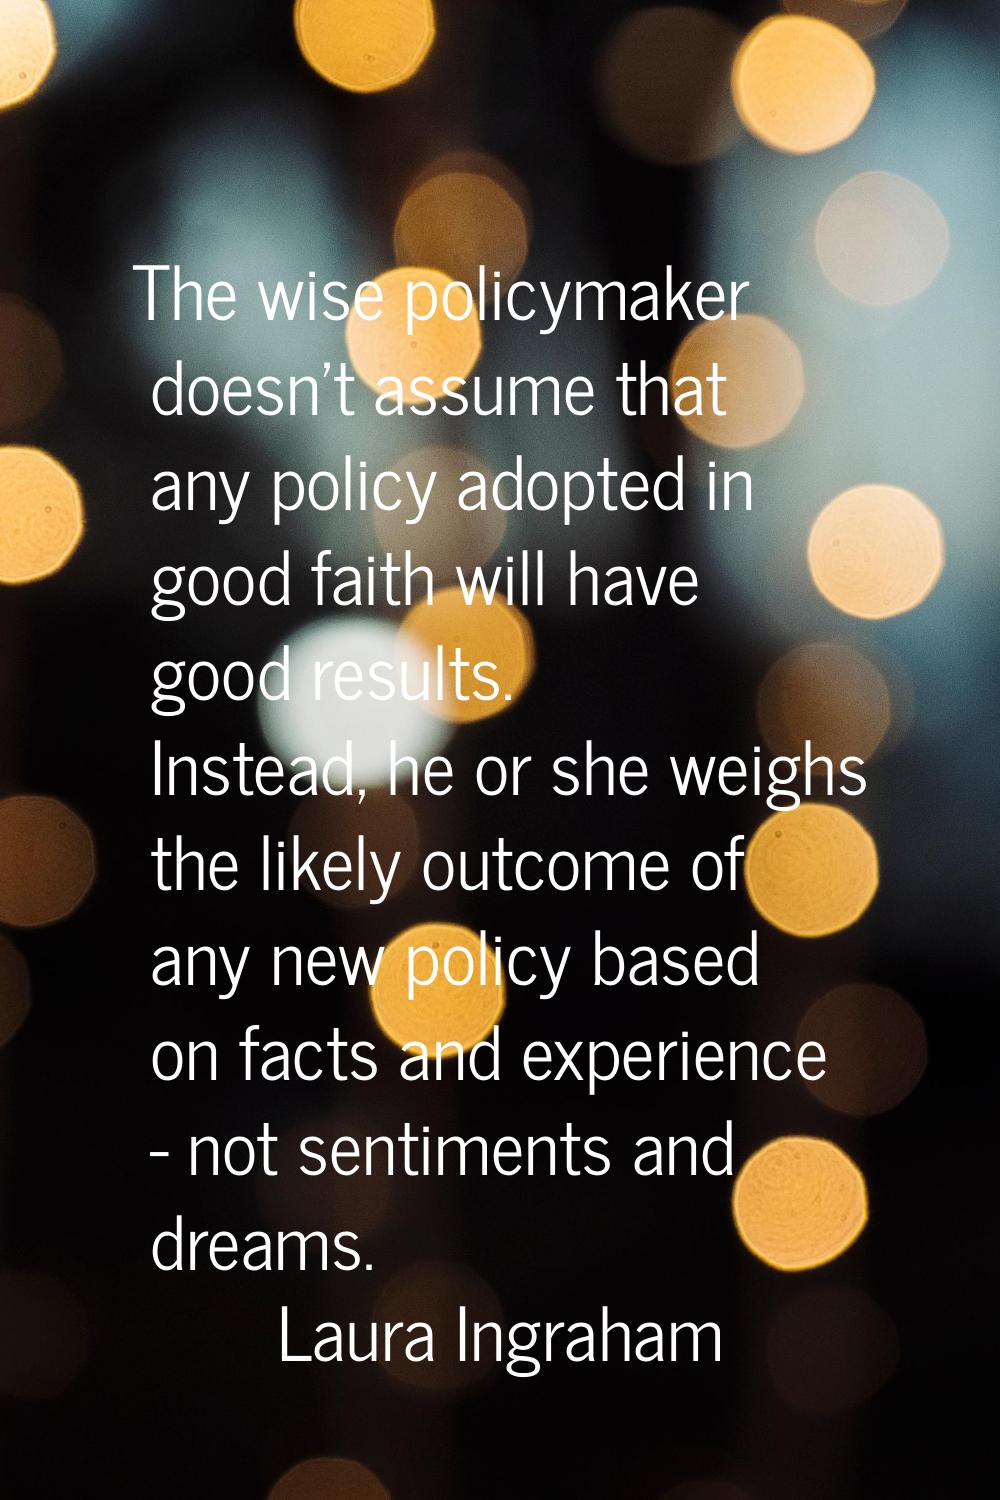 The wise policymaker doesn't assume that any policy adopted in good faith will have good results. I